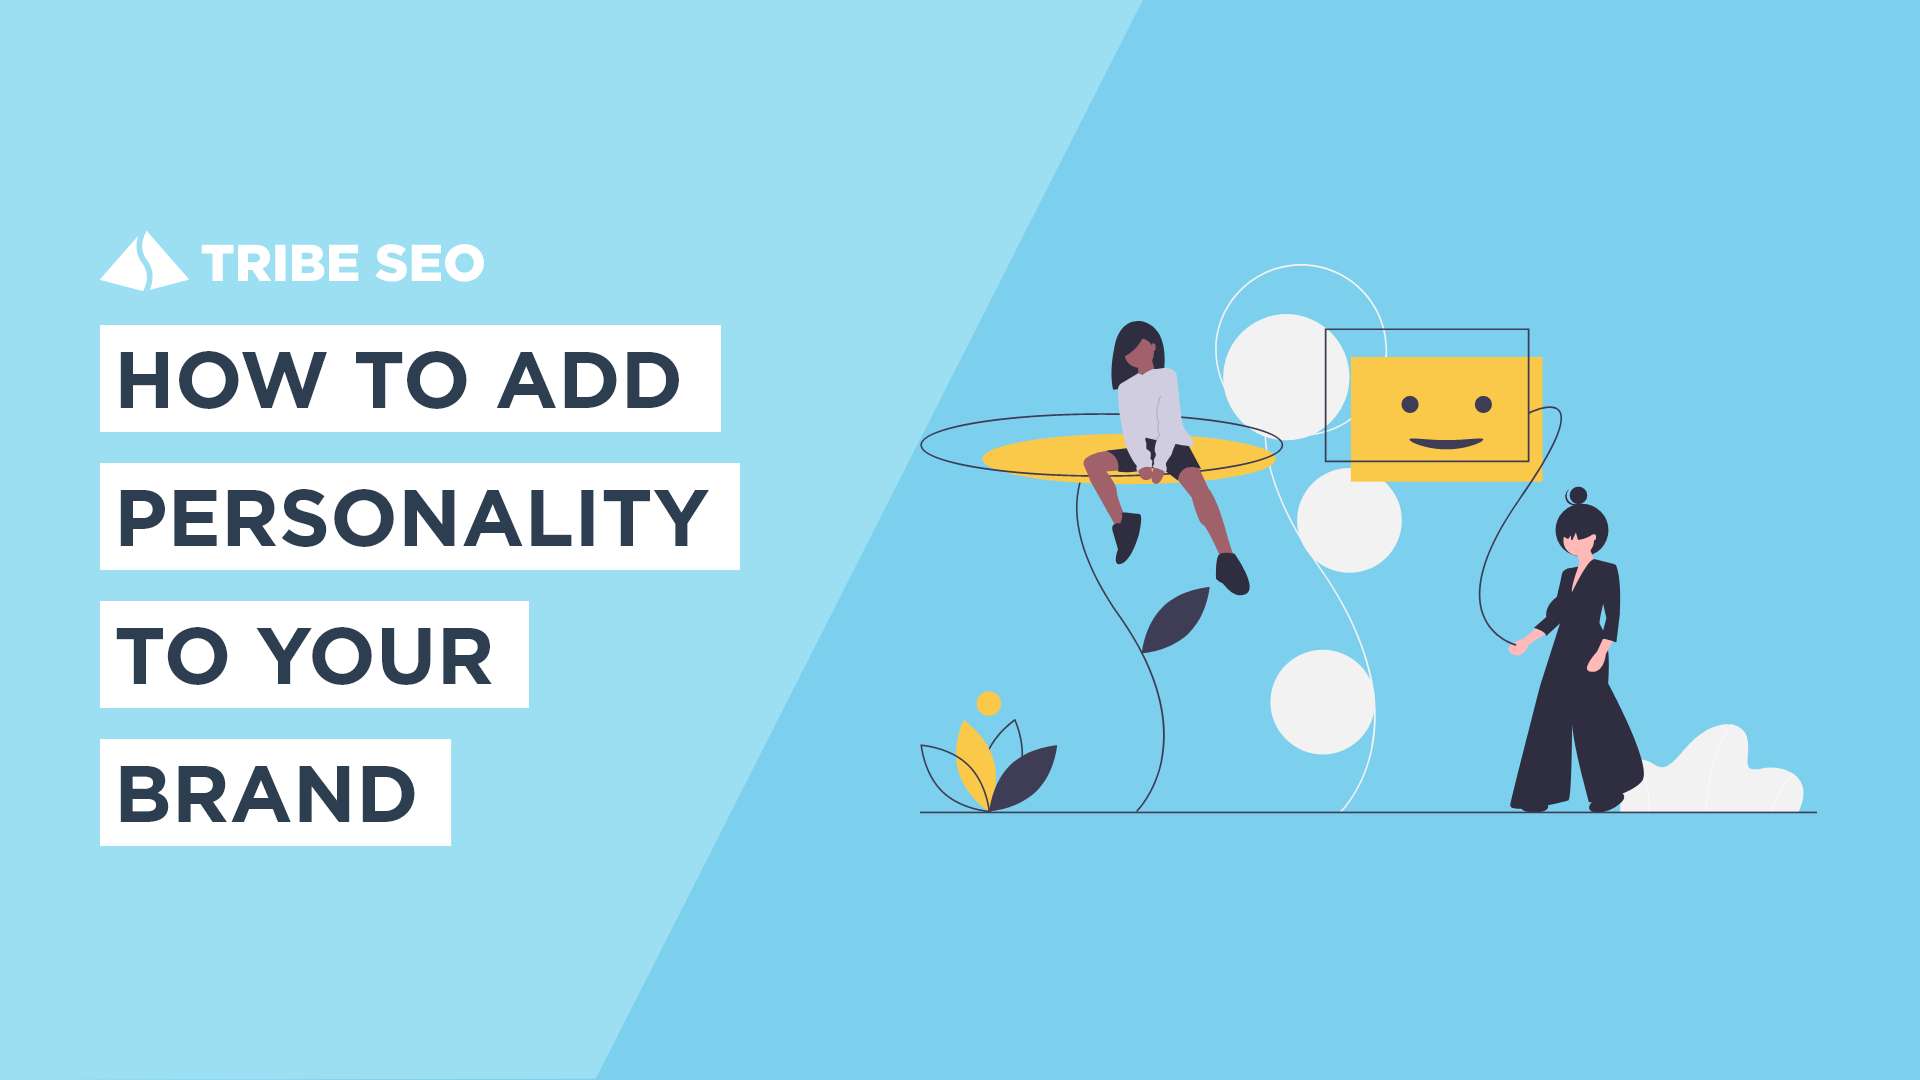 How to Add Personality to Your Brand